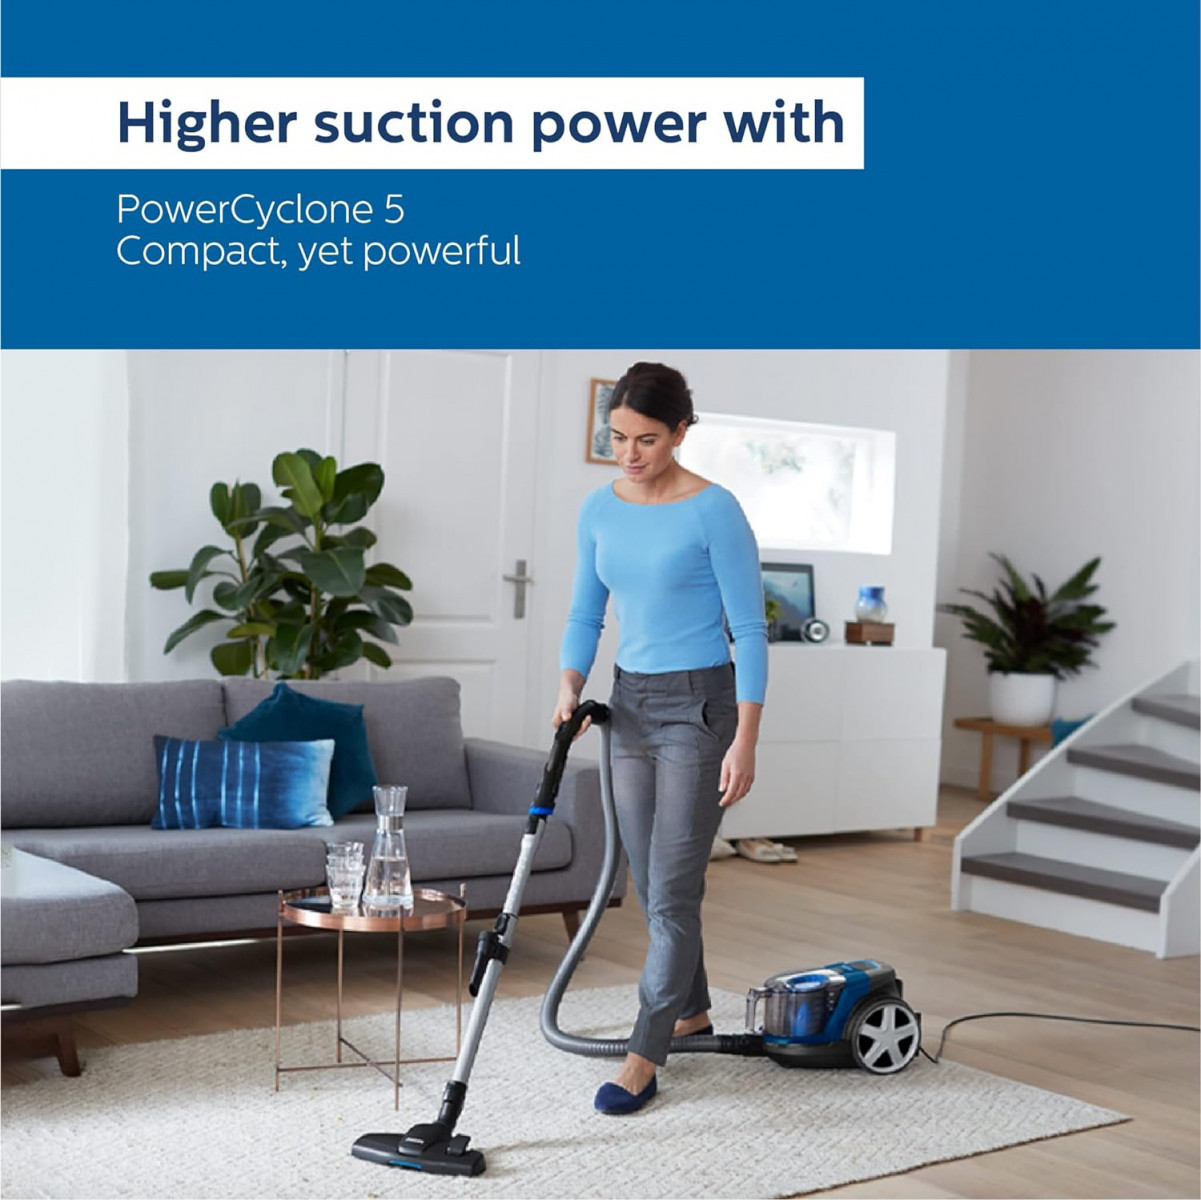 Philips PowerPro FC935201-Compact Bagless Vacuum Cleaner for Home 1900Watts for Powerful Suction Compact and Lightweight PowerCyclone 5 Technology and MultiClean Nozzle 2 Years Warranty